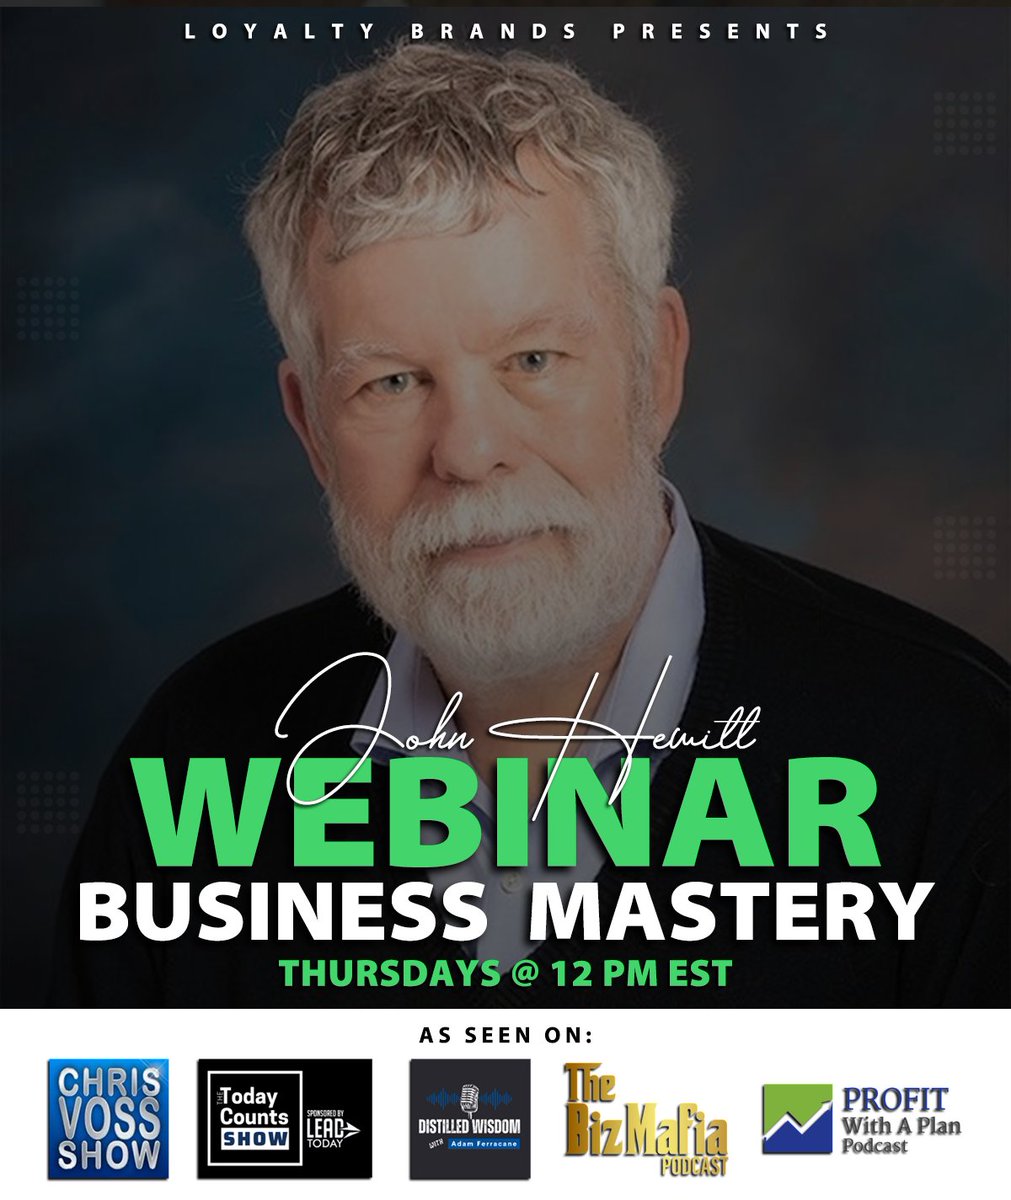 🚀 Ready to unlock the secrets to business mastery? Join us TOMORROW at 12 PM EST for an exclusive 'Business Mastery with John Hewitt' webinar! Register now to redefine your approach to success: us02web.zoom.us/webinar/regist… #BusinessMastery #Entrepreneurship #SuccessStrategies...